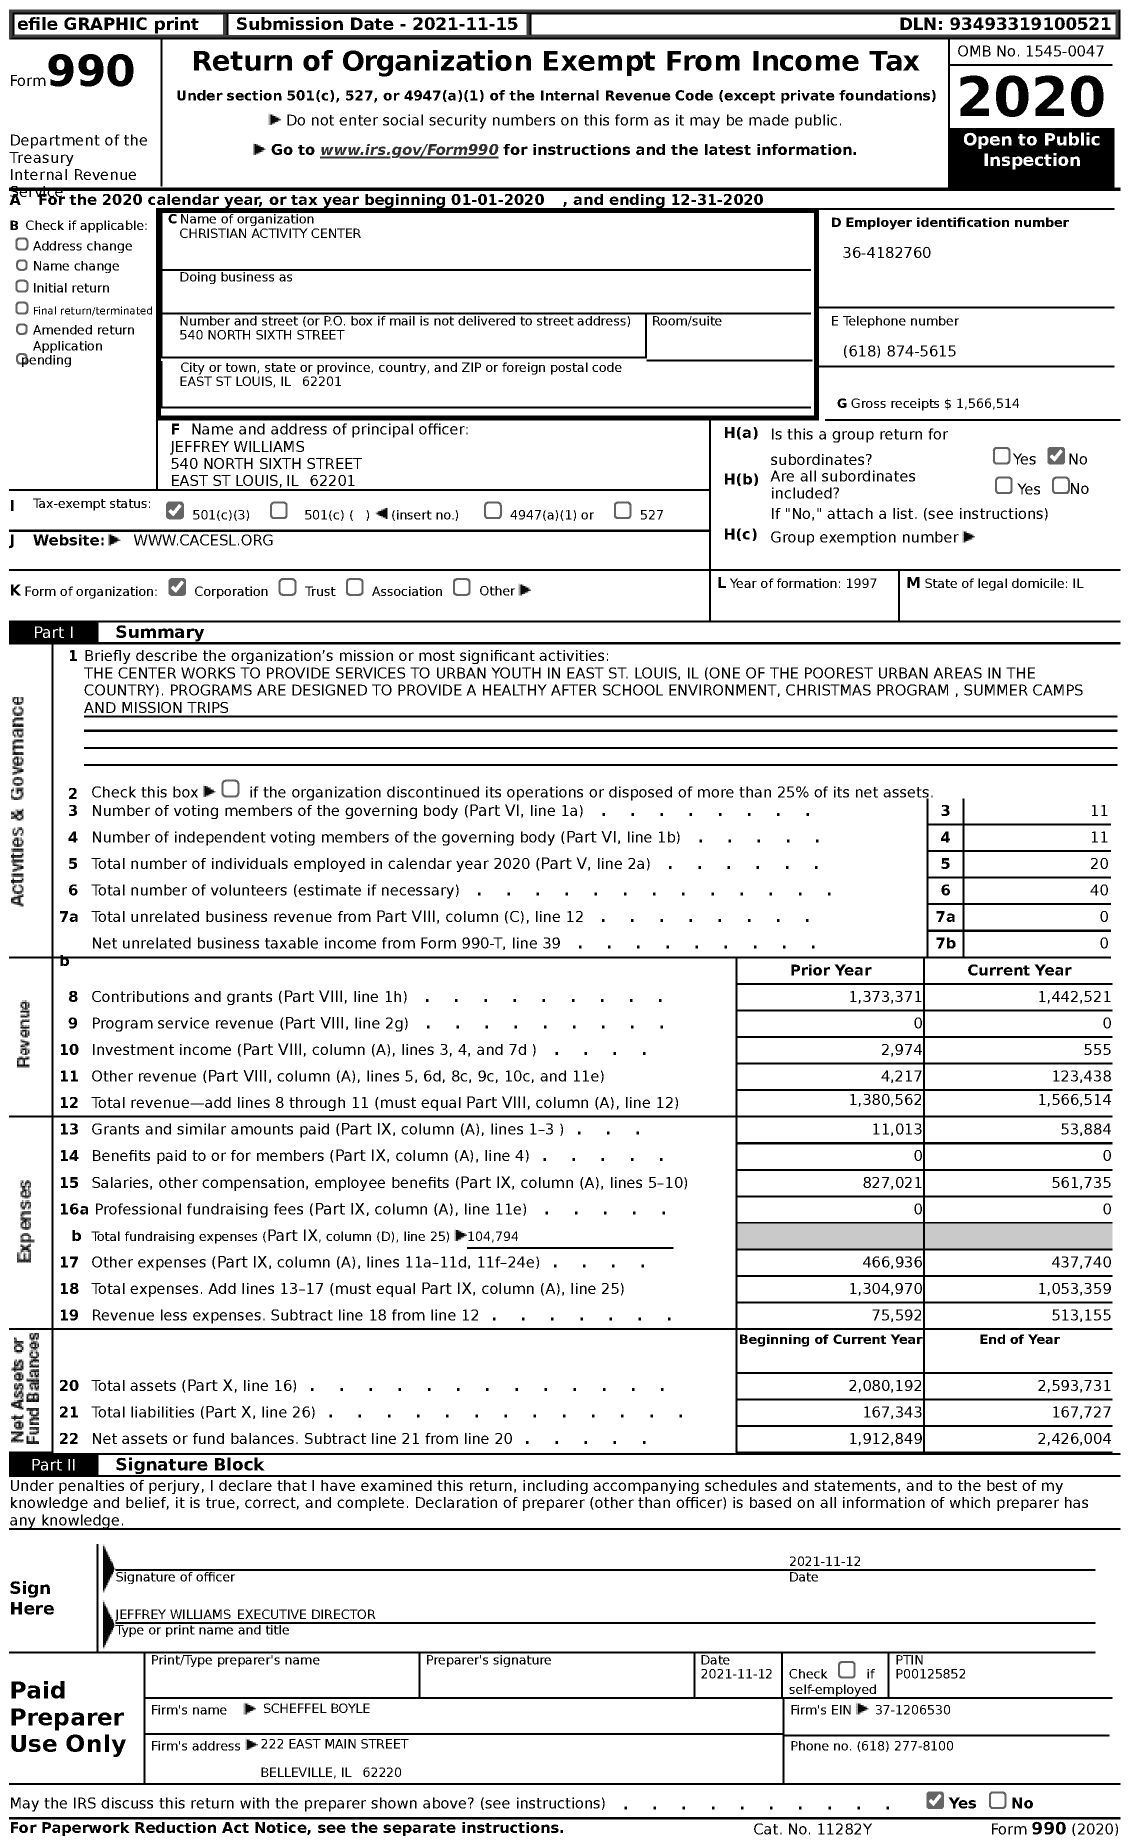 Image of first page of 2020 Form 990 for Christian Activity Center